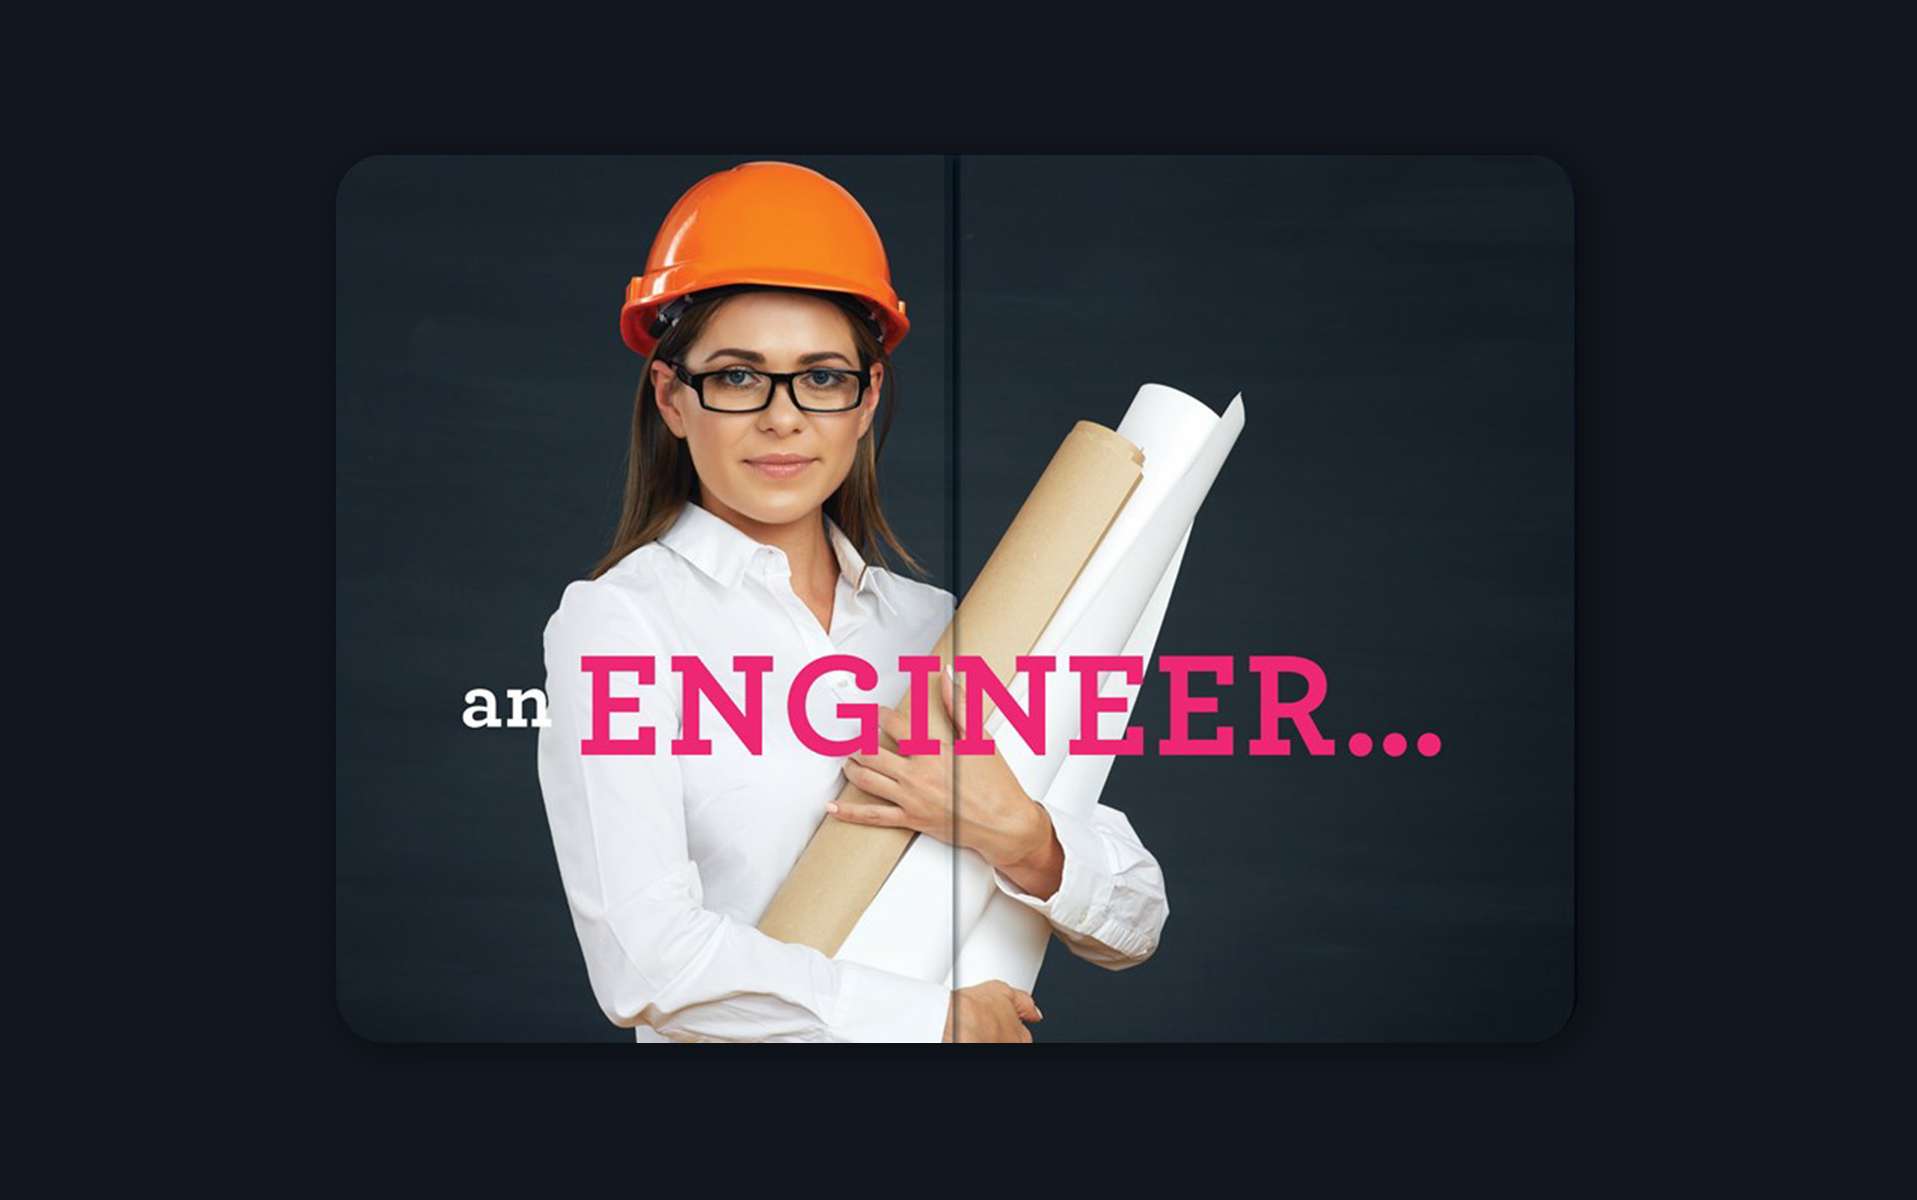 An Engineer. Photo of a young white woman holding blueprints, wearing a hard hat.